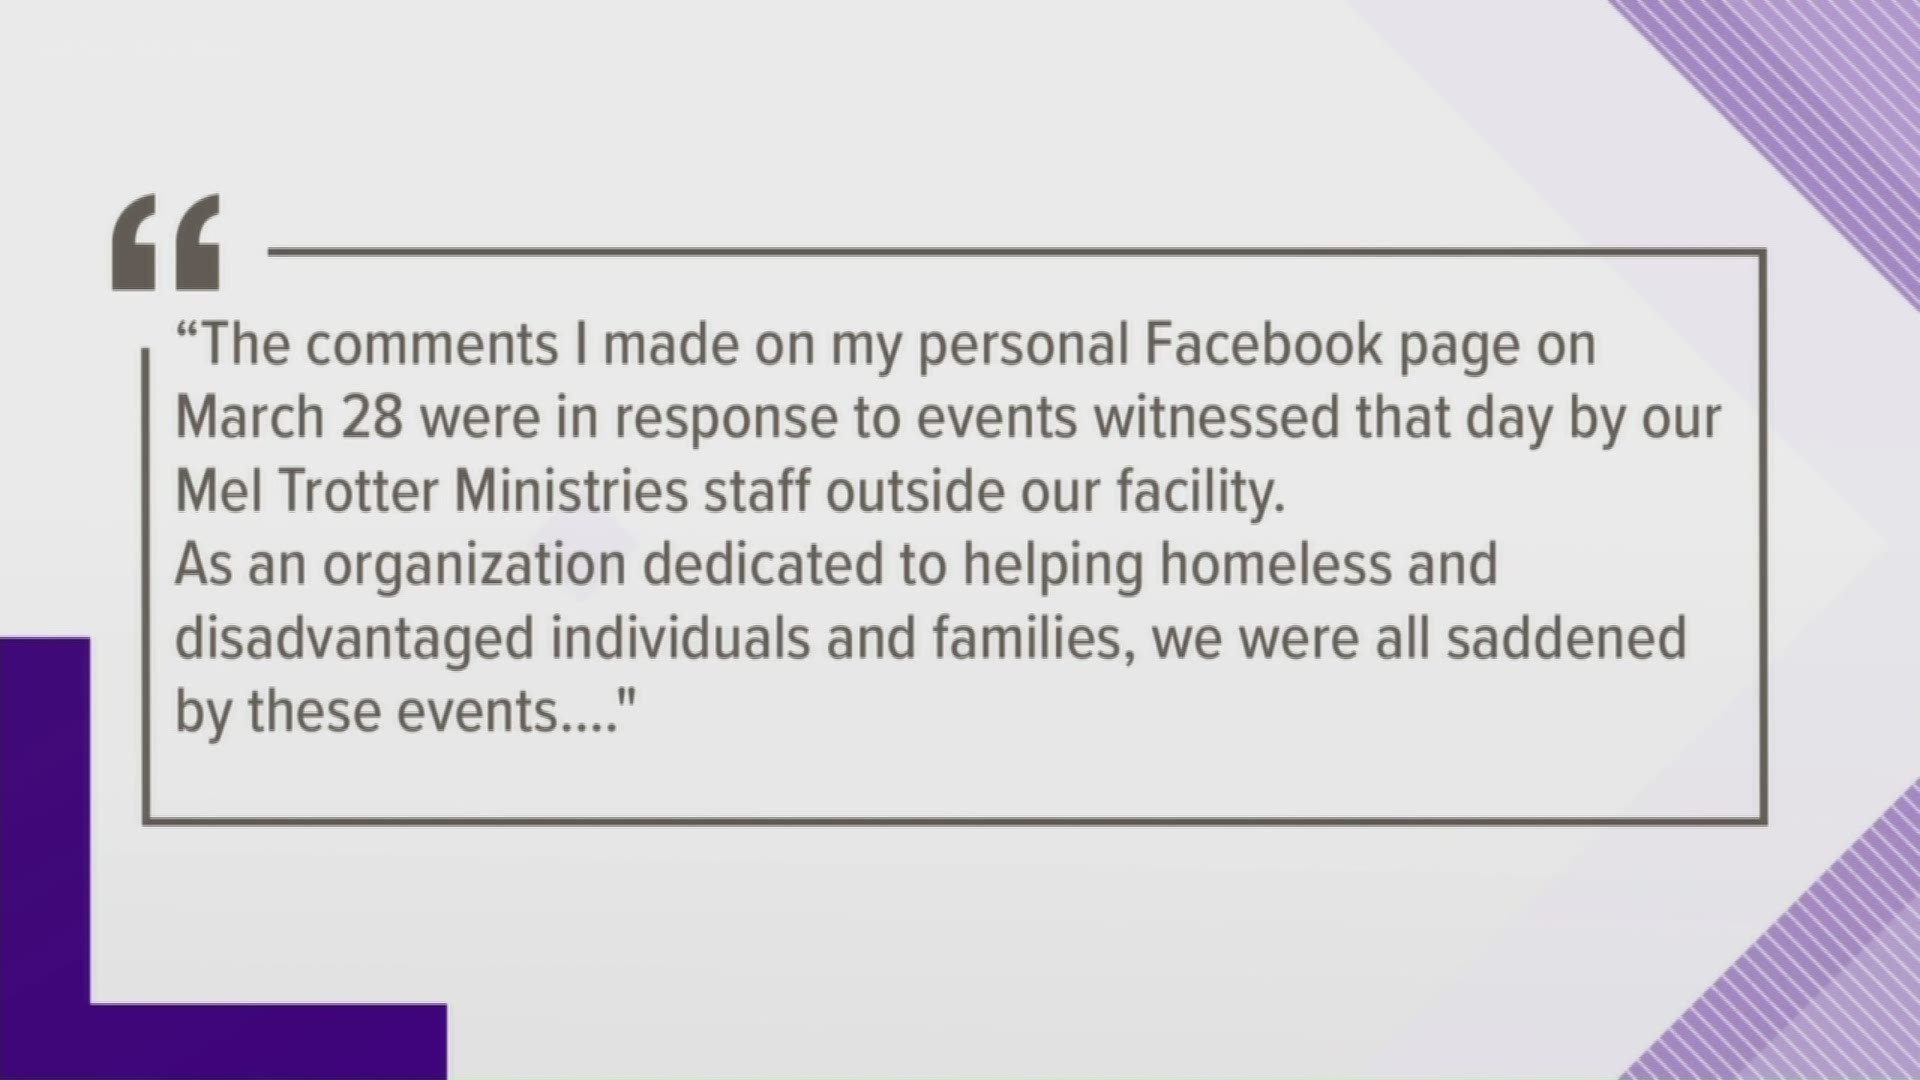 It's been two weeks since President Donald Trump visited Grand Rapids, but a comment from the CEO of Mel Trotter Ministries on his personal Facebook page, continues to stir controversy.